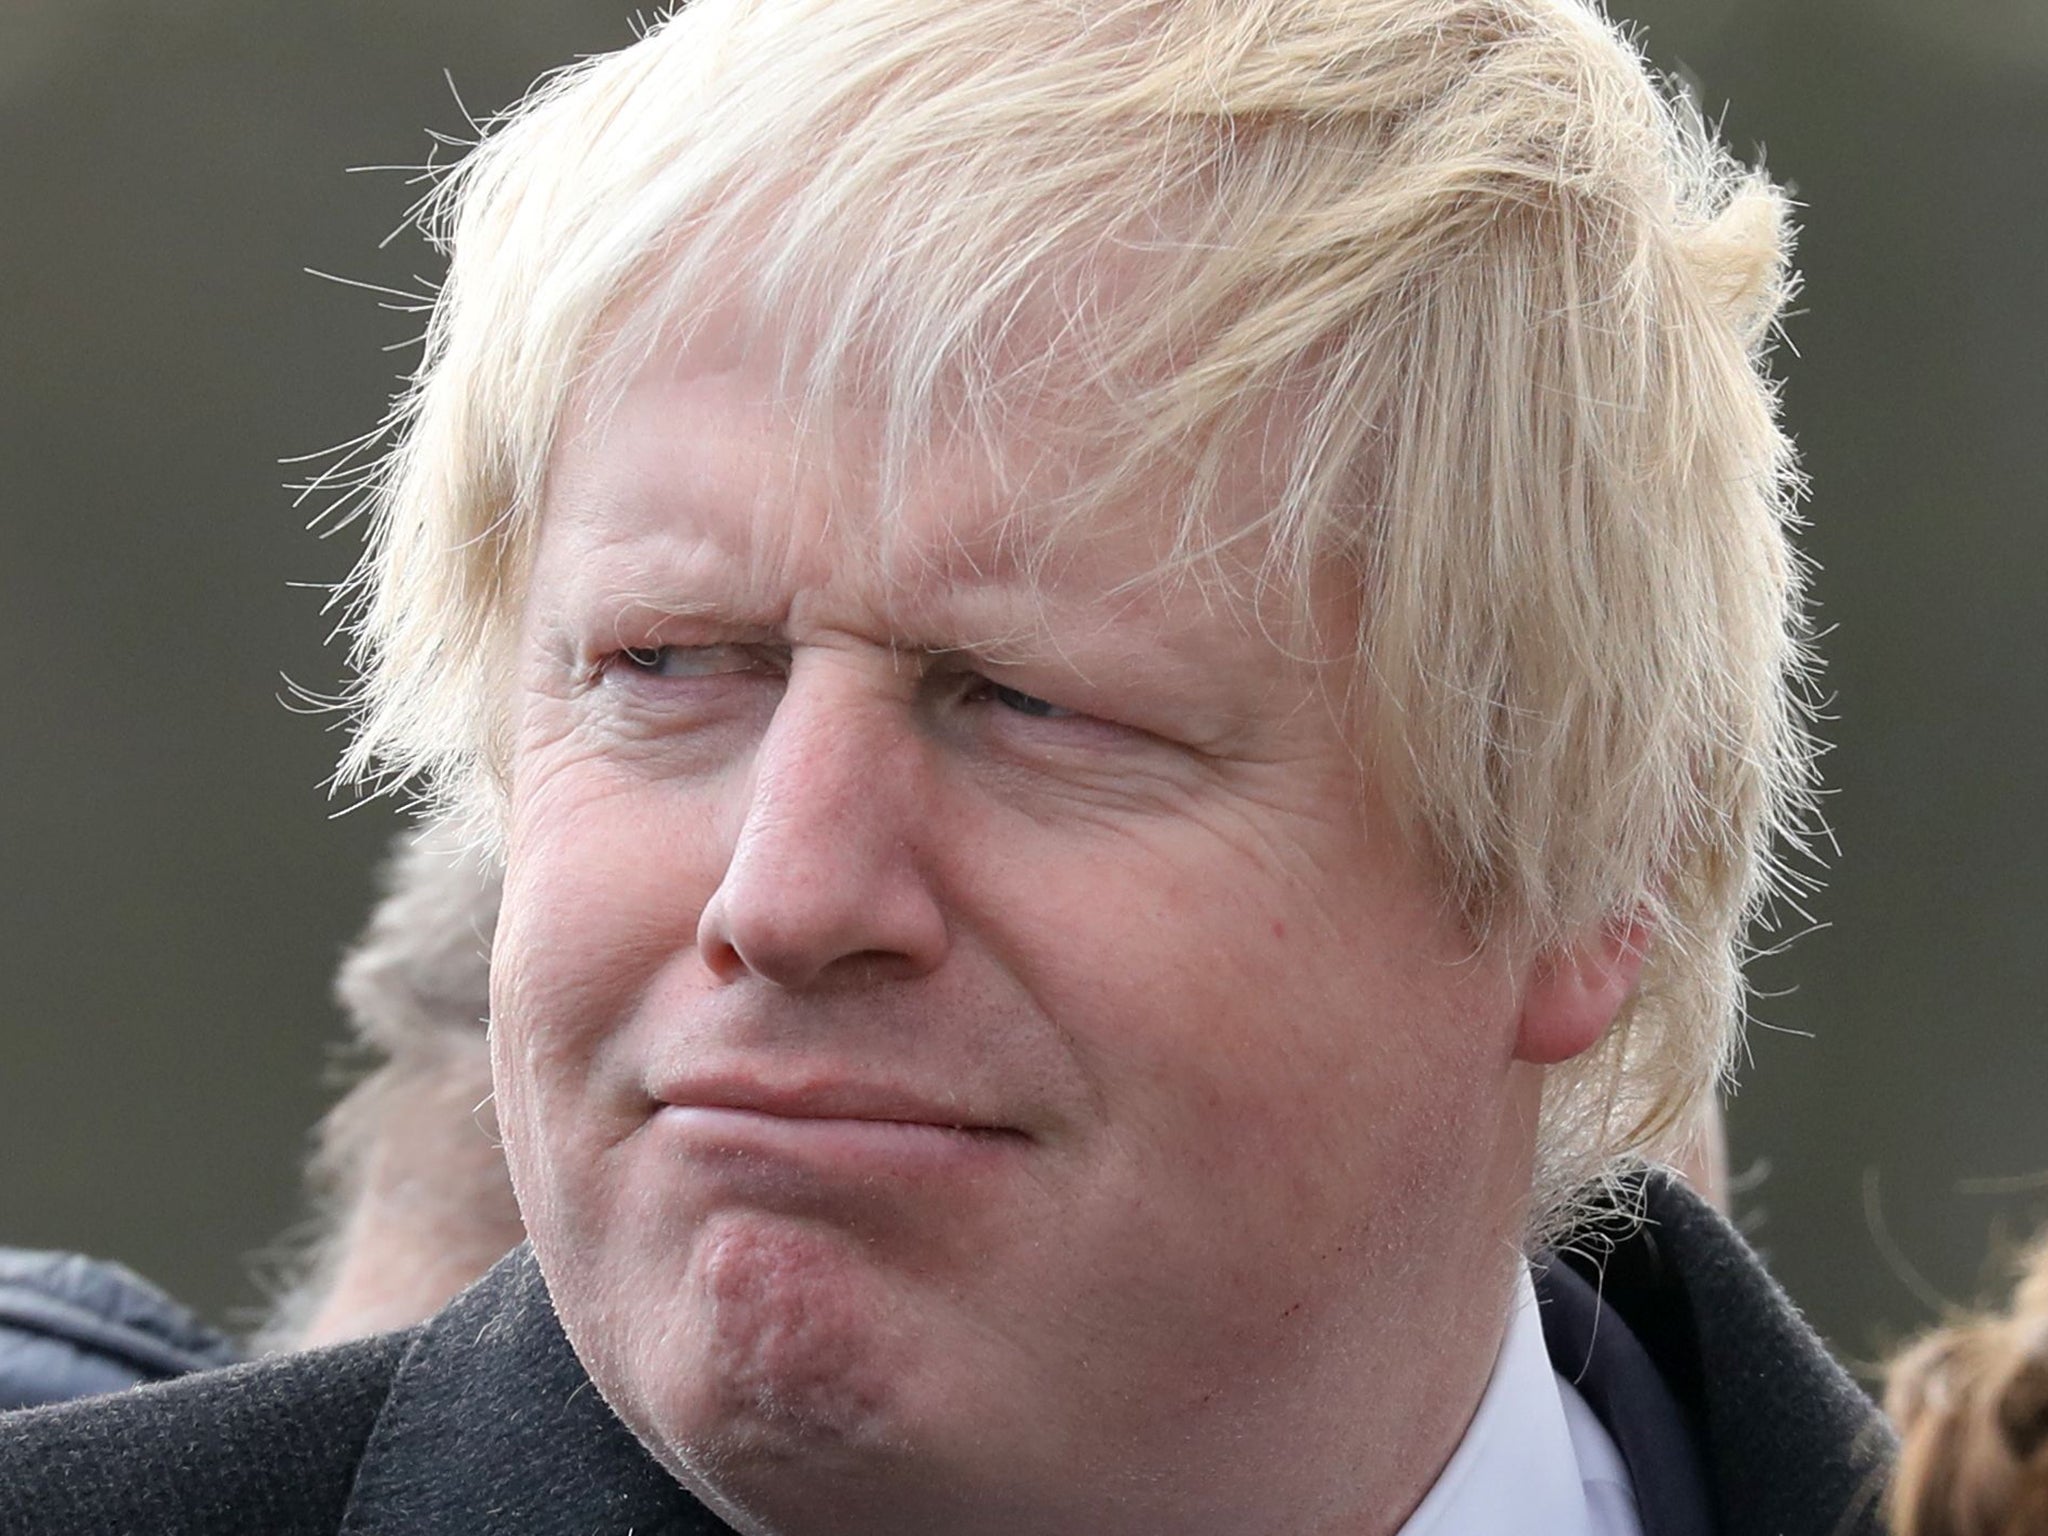 Boris Johnson is Foreign Secretary - but will dominate Cabinet with a plea for more NHS funding